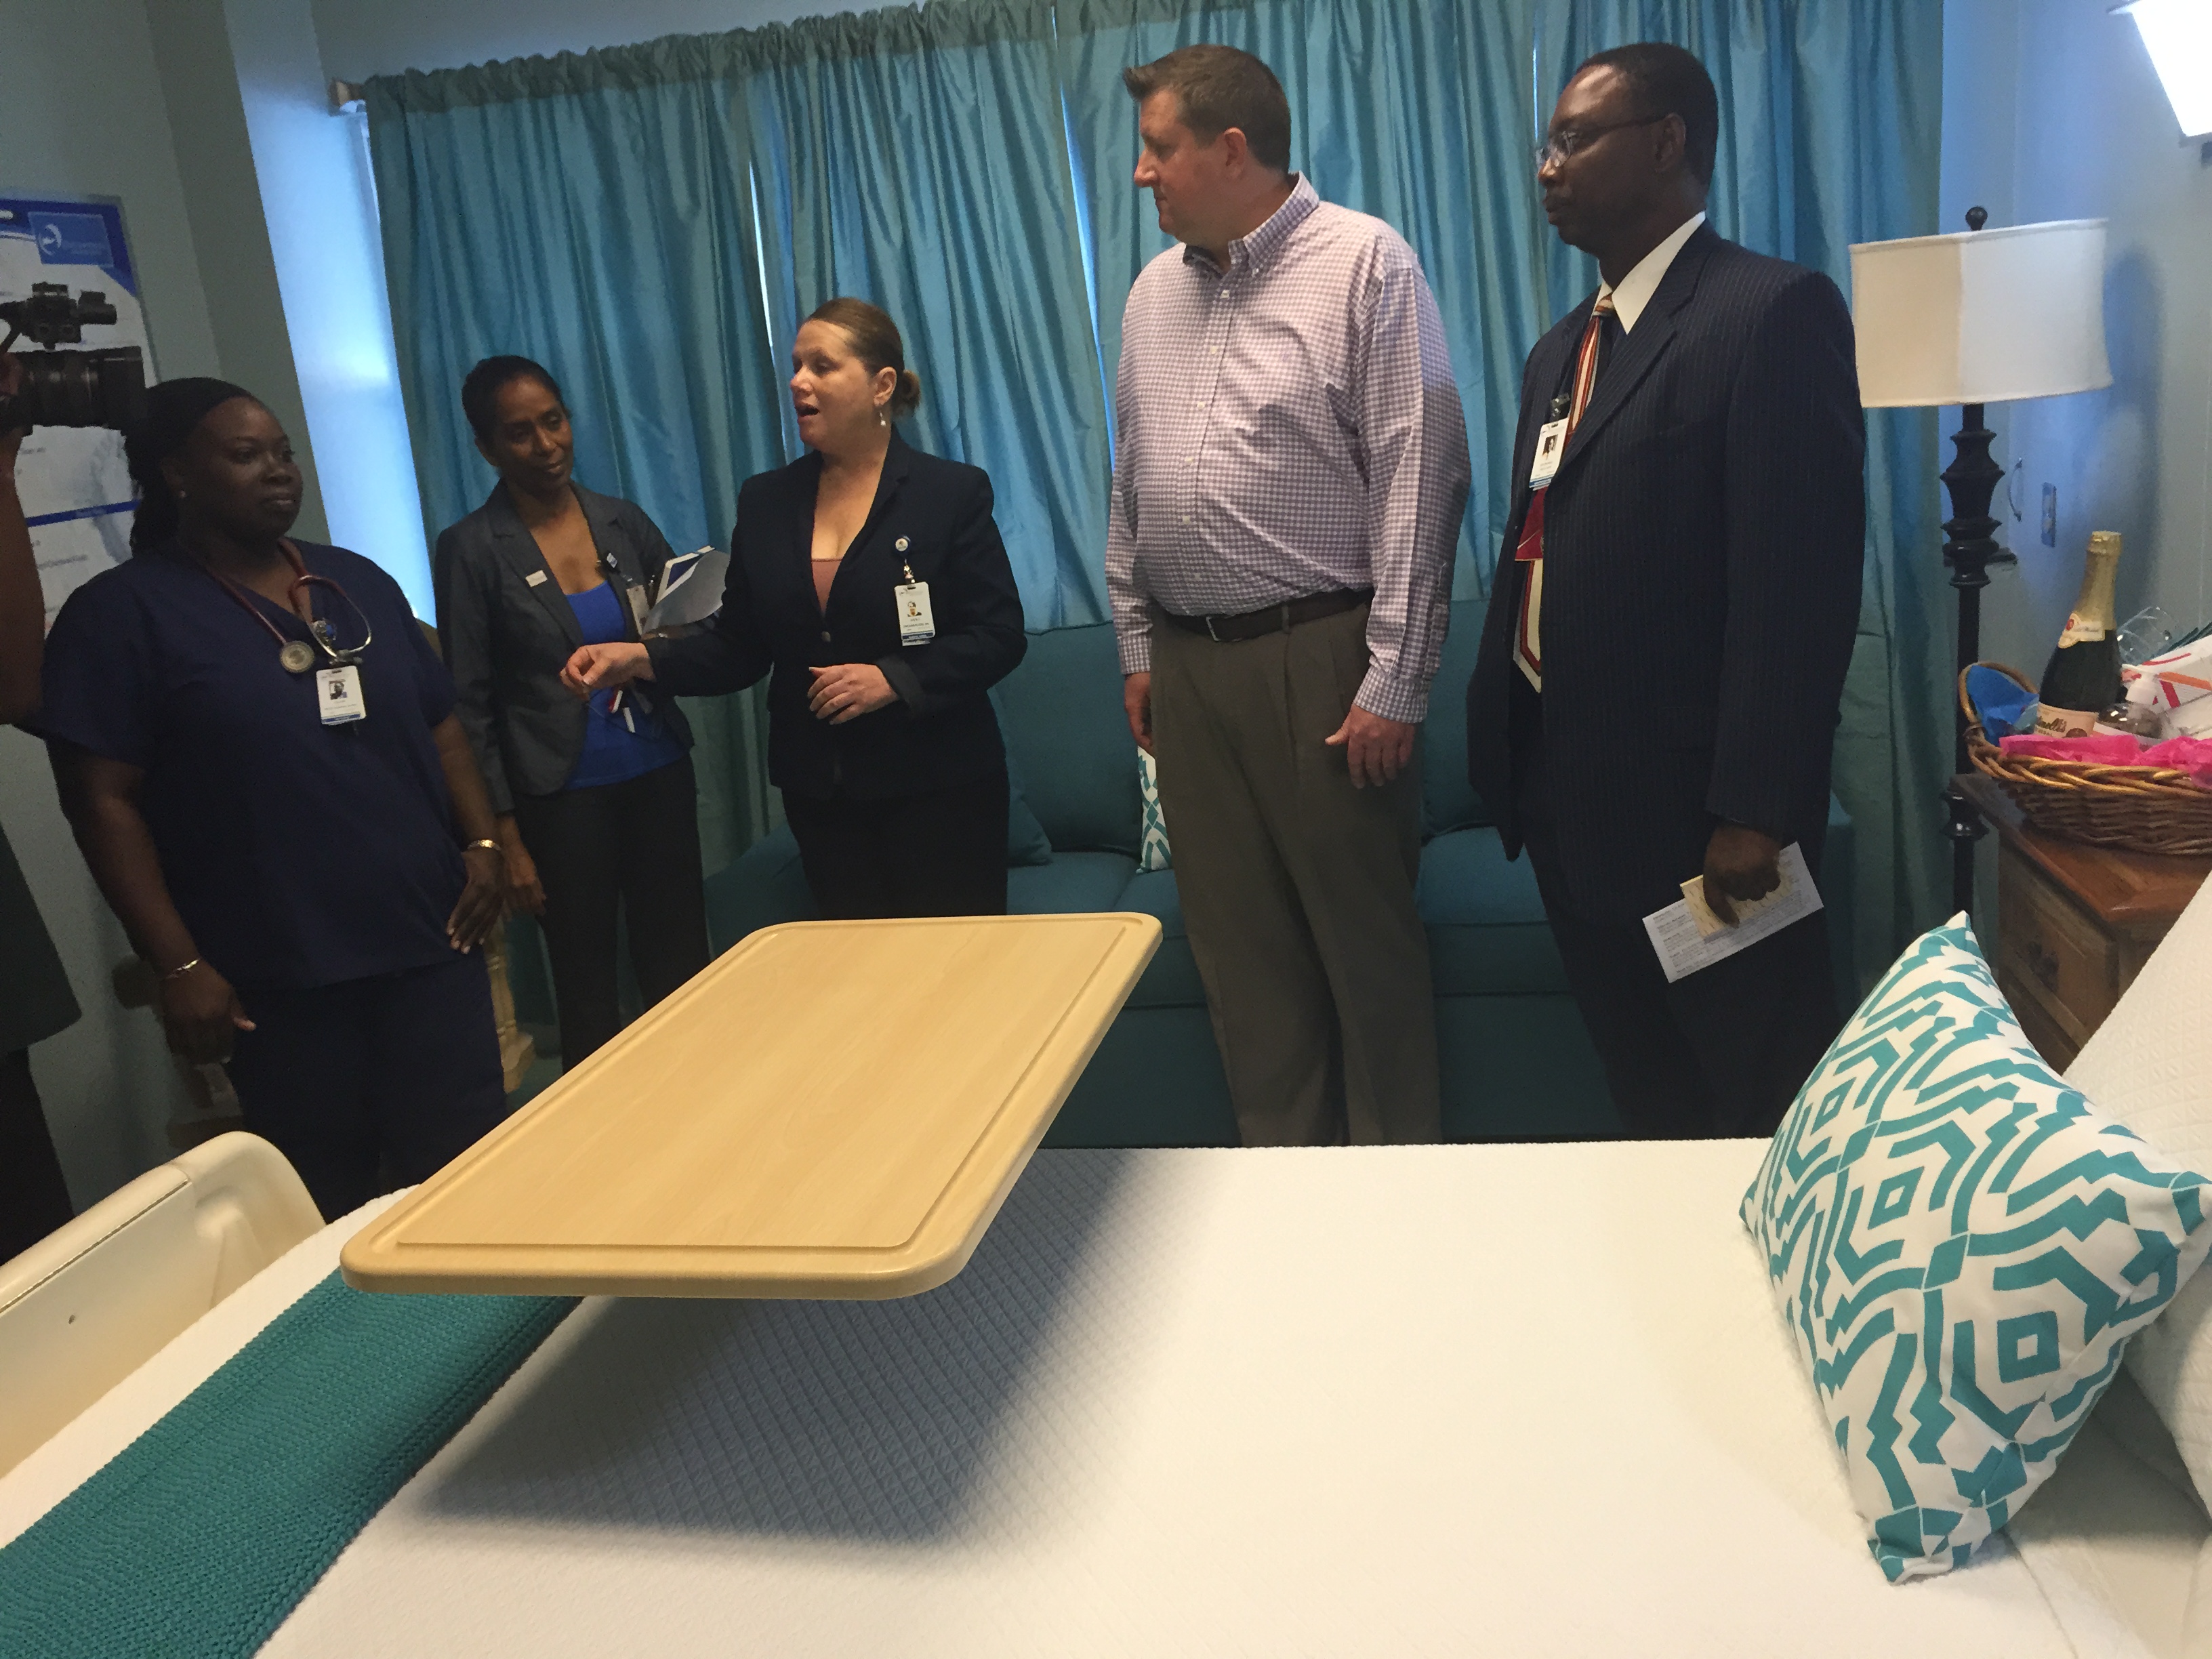 David A. Johnson, co-founder of St. Croix-based consulting firm Cane Bay Partners VI, takes a tour of the rooms renovated using the first installment of his $50,000 donation to the Women’s and Childre